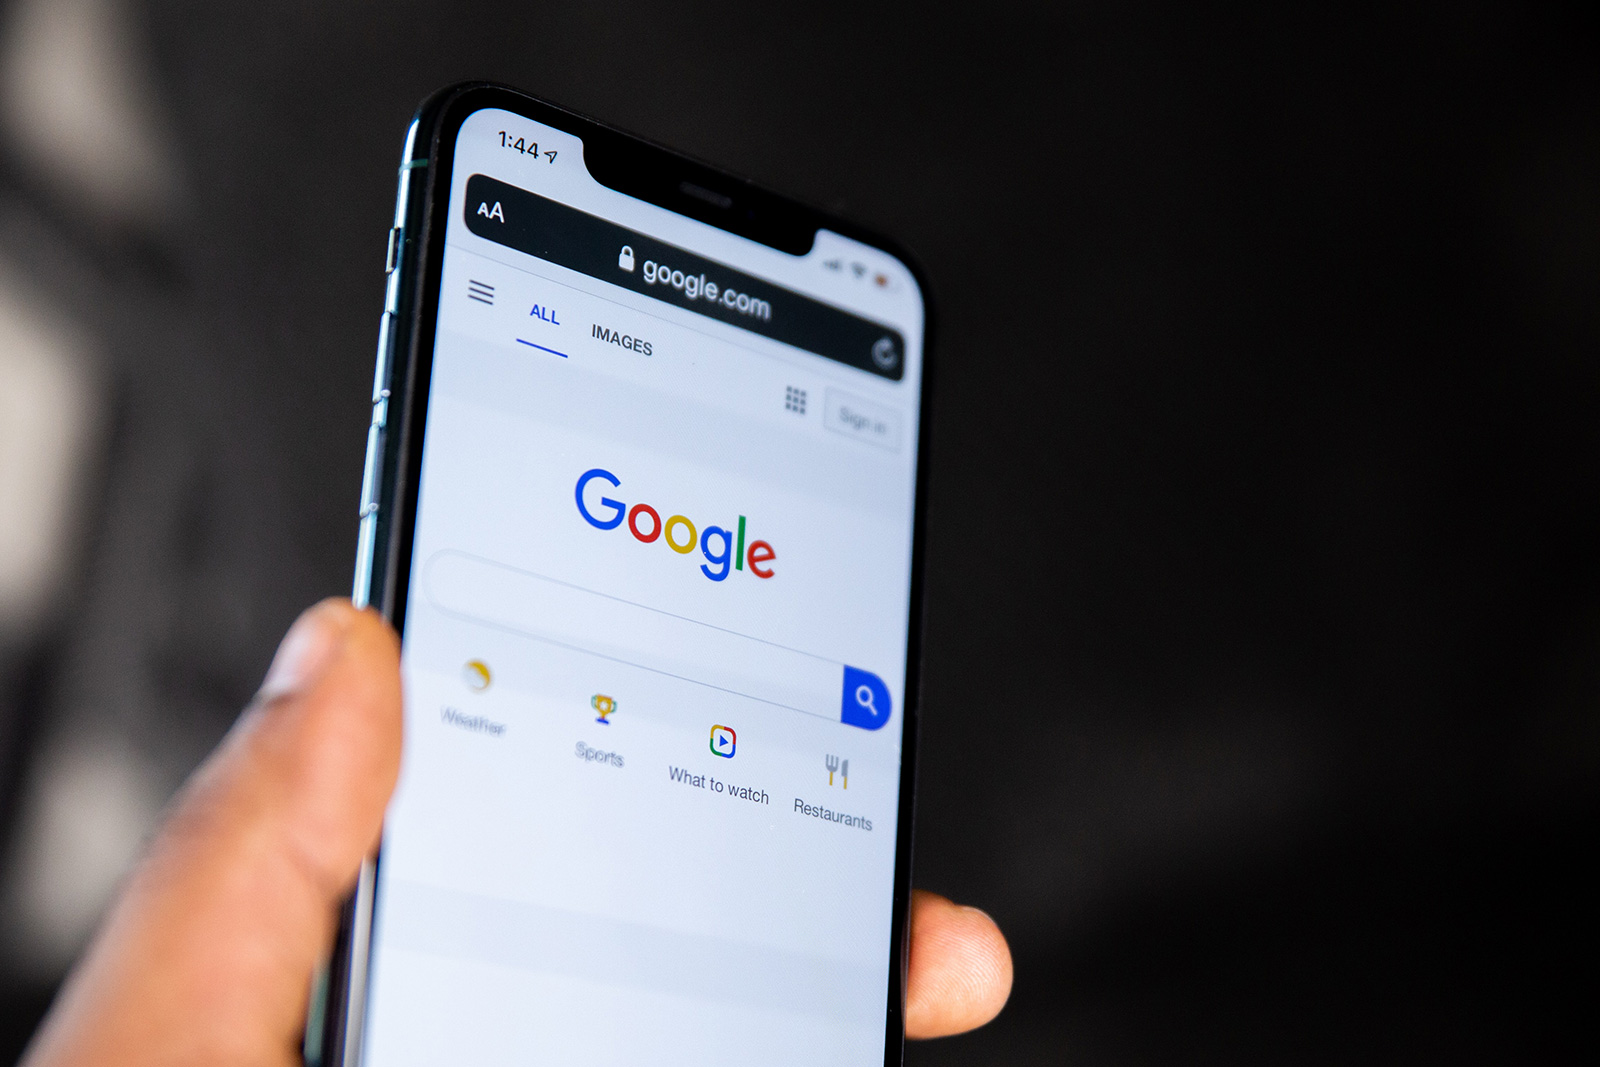 Google made one of its best search shortcuts even more useful